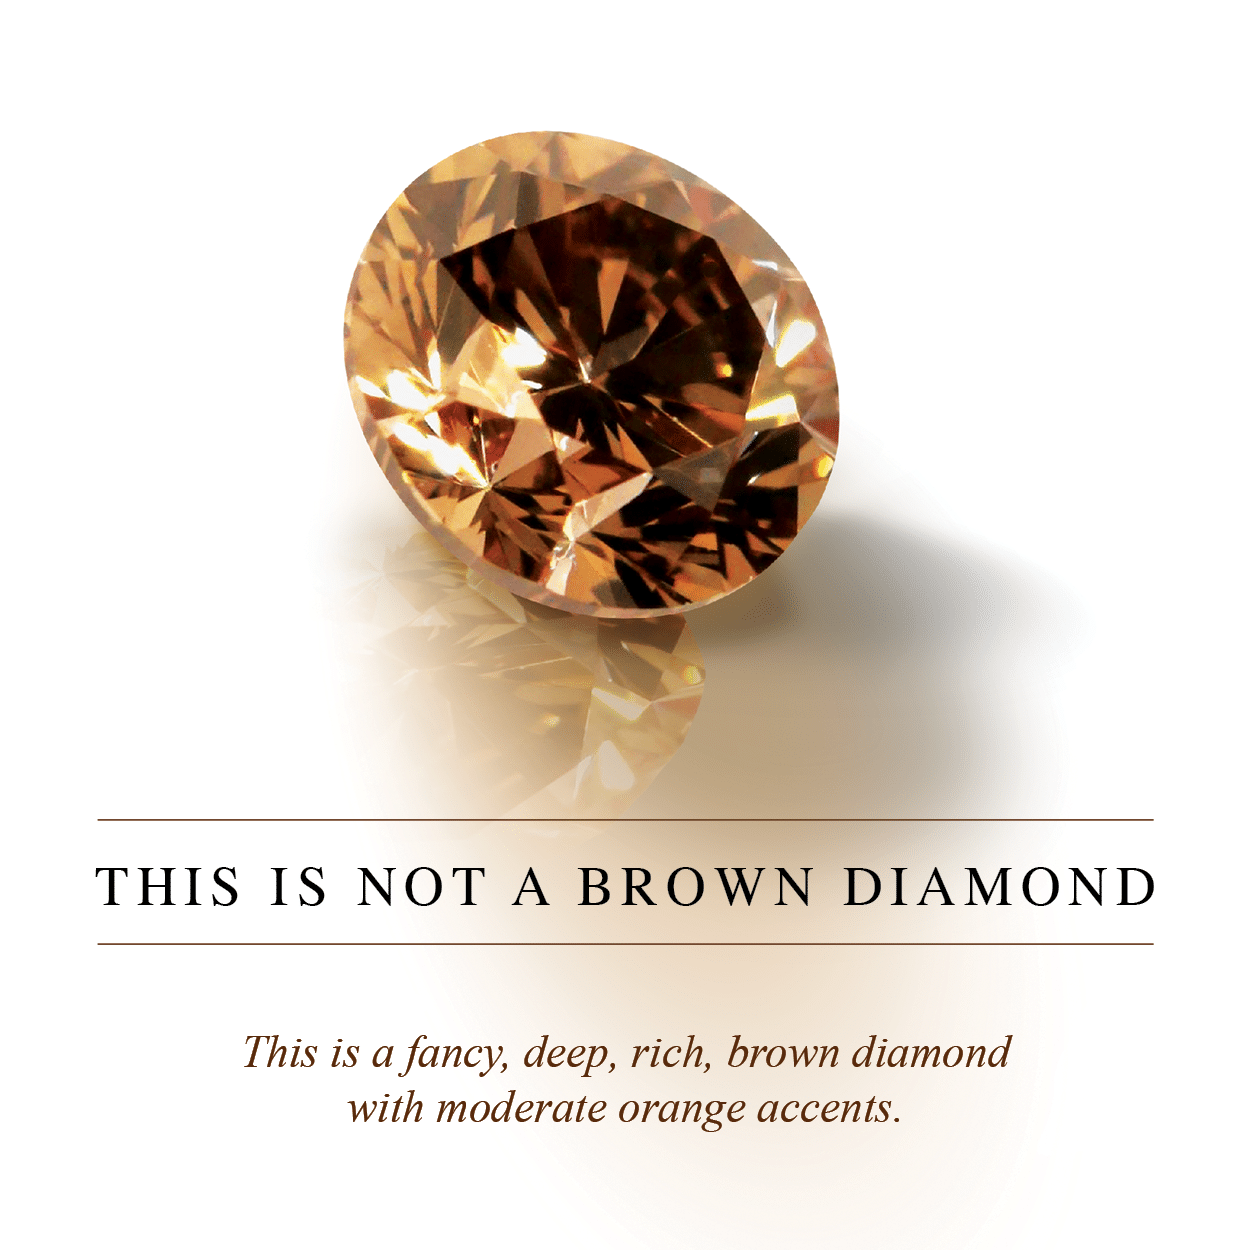 Fancy, deep, rich, brown diamond with moderate orange accents.